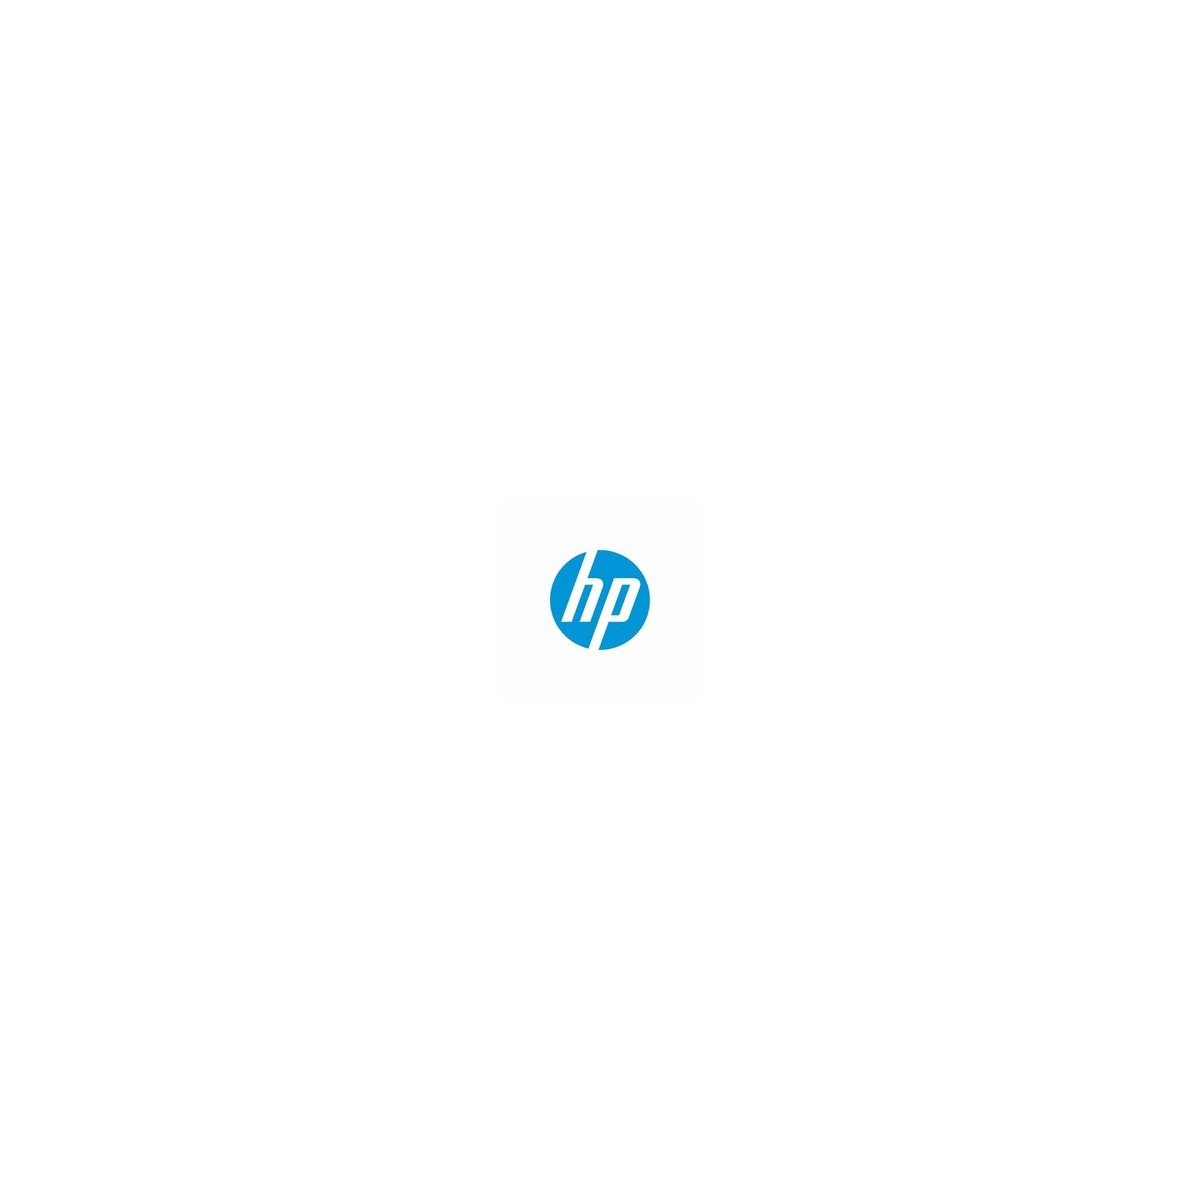 HP W2030XH - 7500 pages - Black - 1 pc(s)